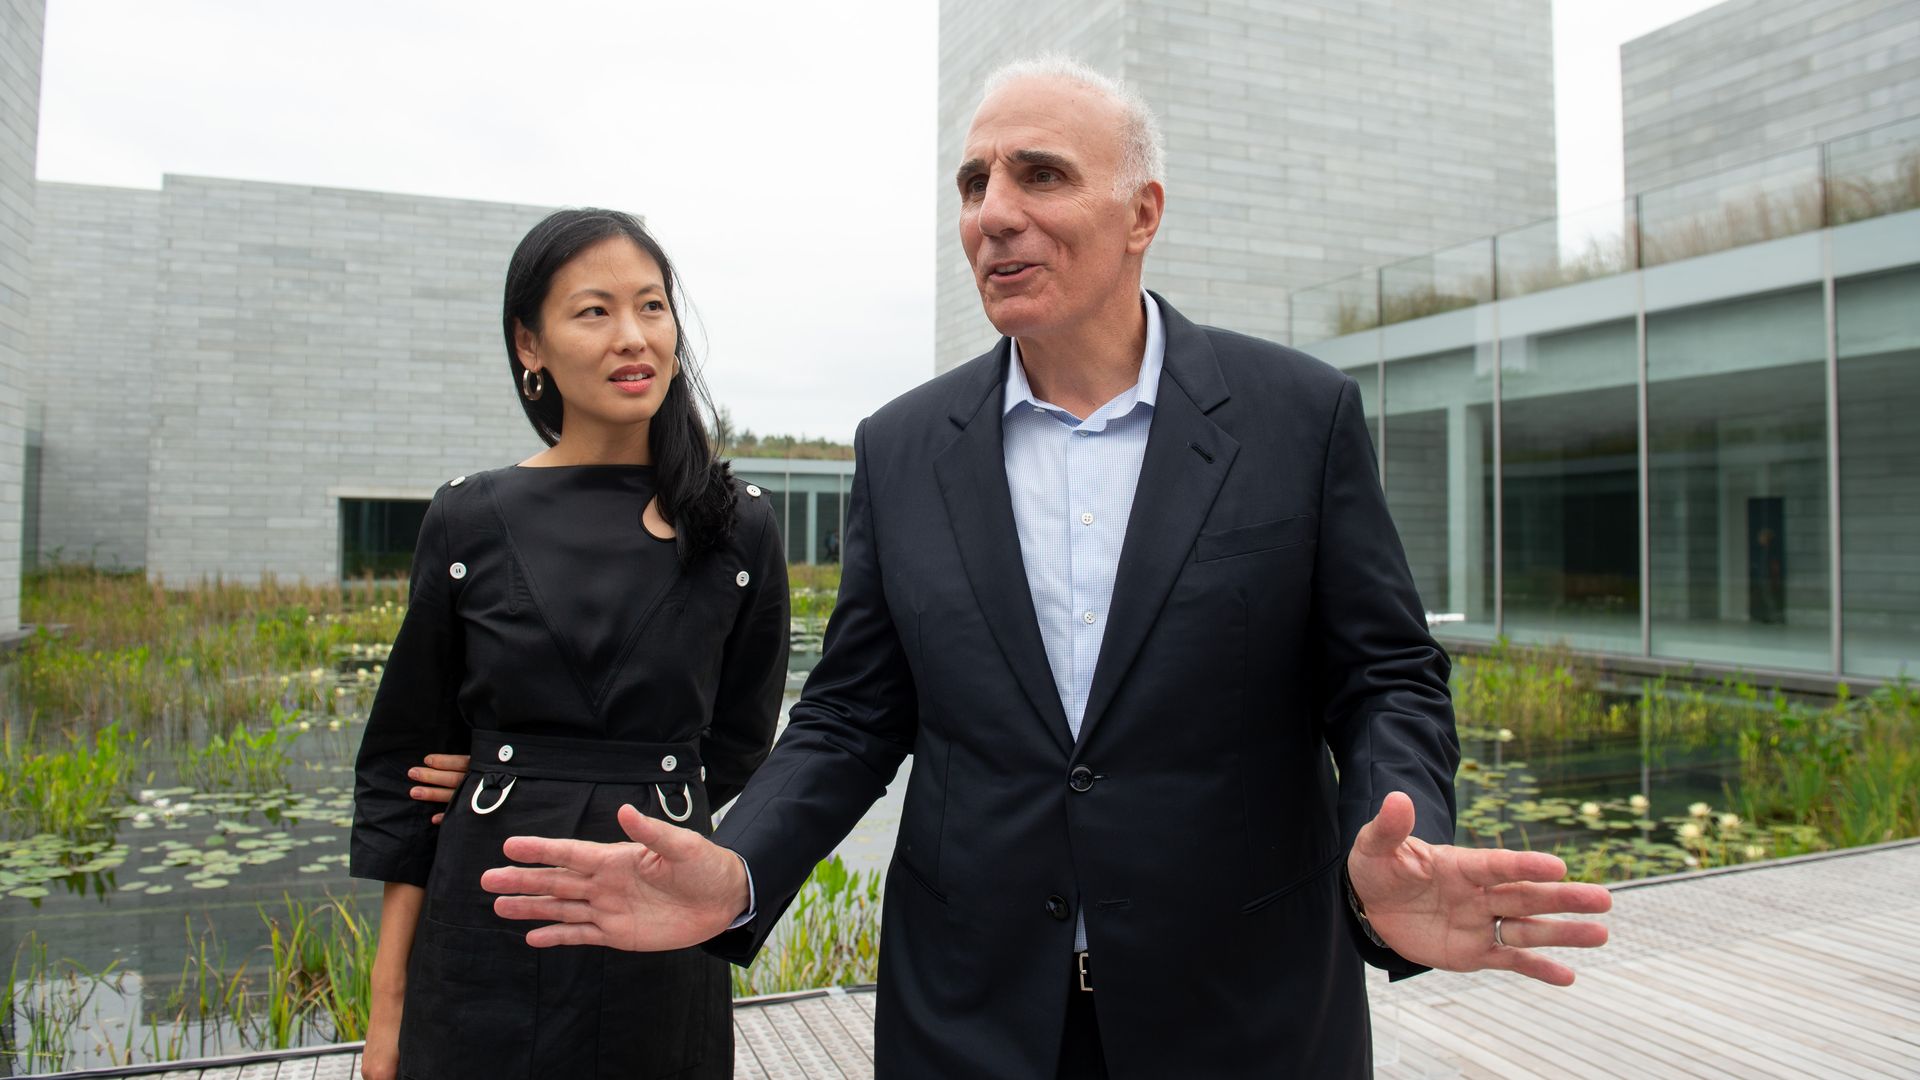 Mitchell Rales next to his wife Emily Wei Rales at the Glenstone Museum